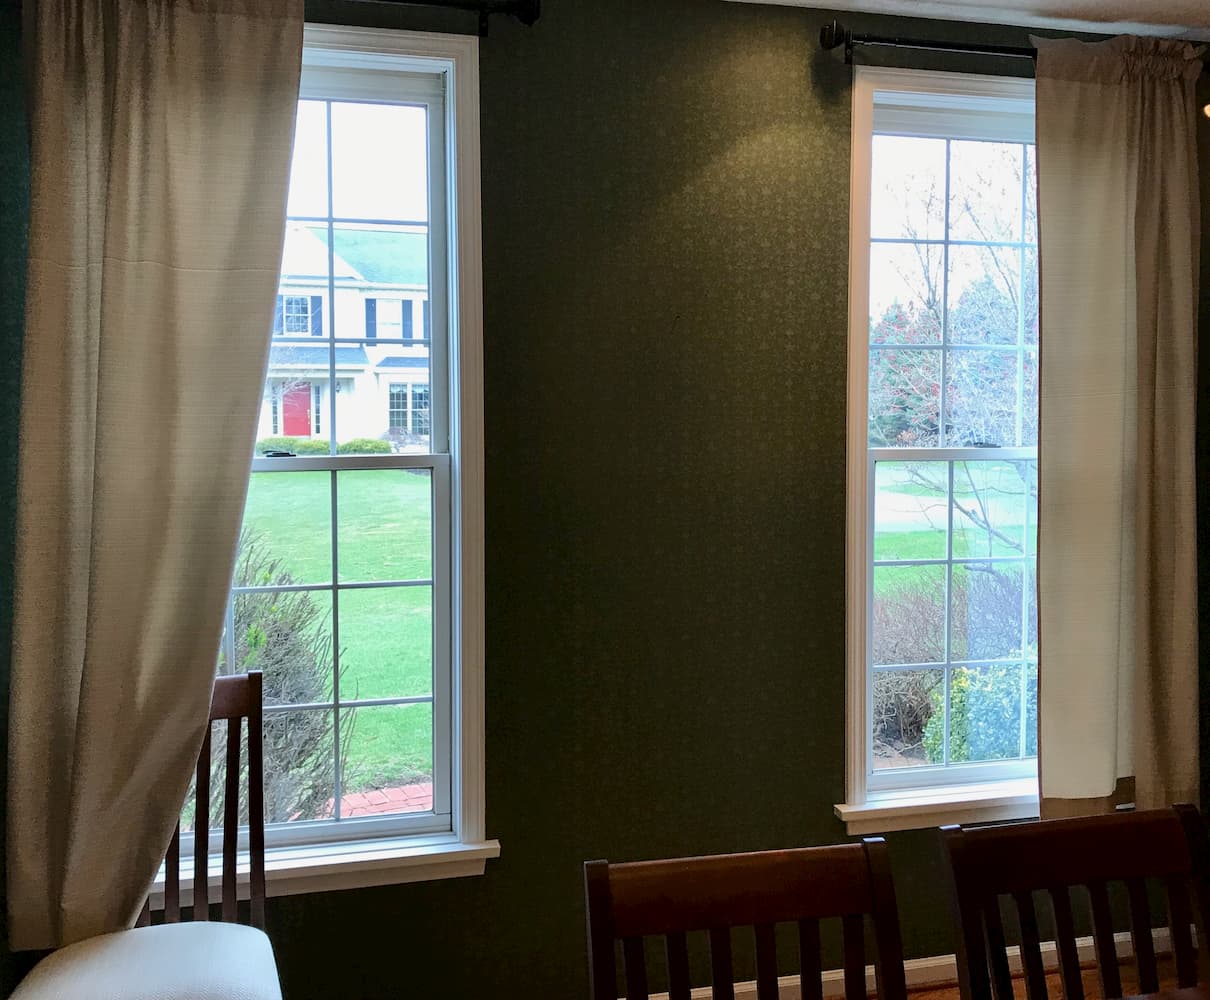 Interior view of two old double-hung windows in a dining room